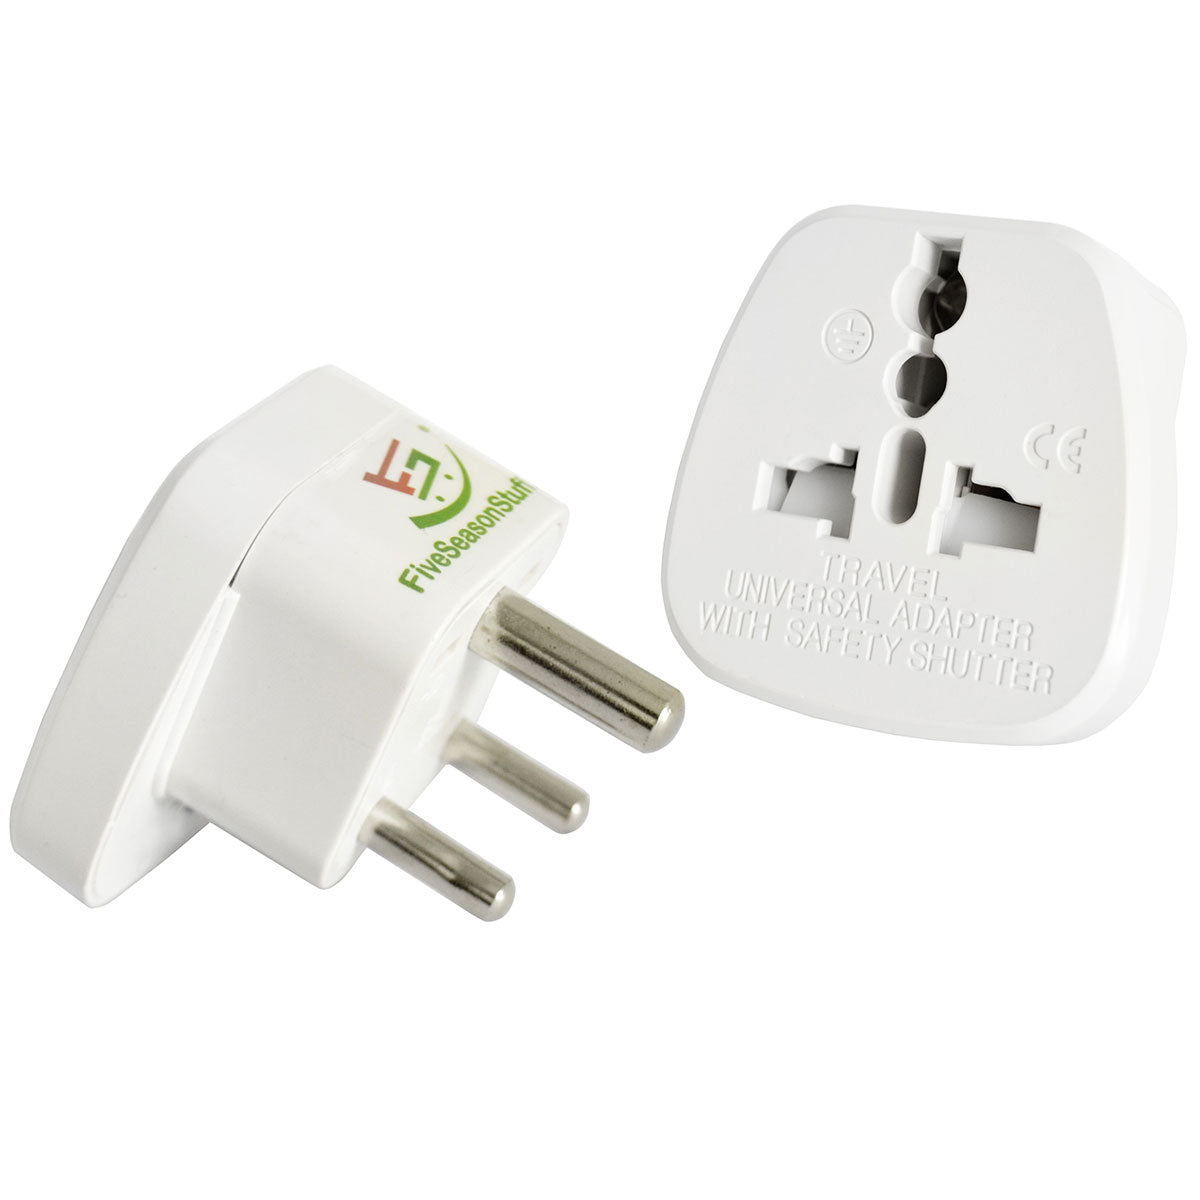 1 Travel Adapter for Traveling to India (White) Type M